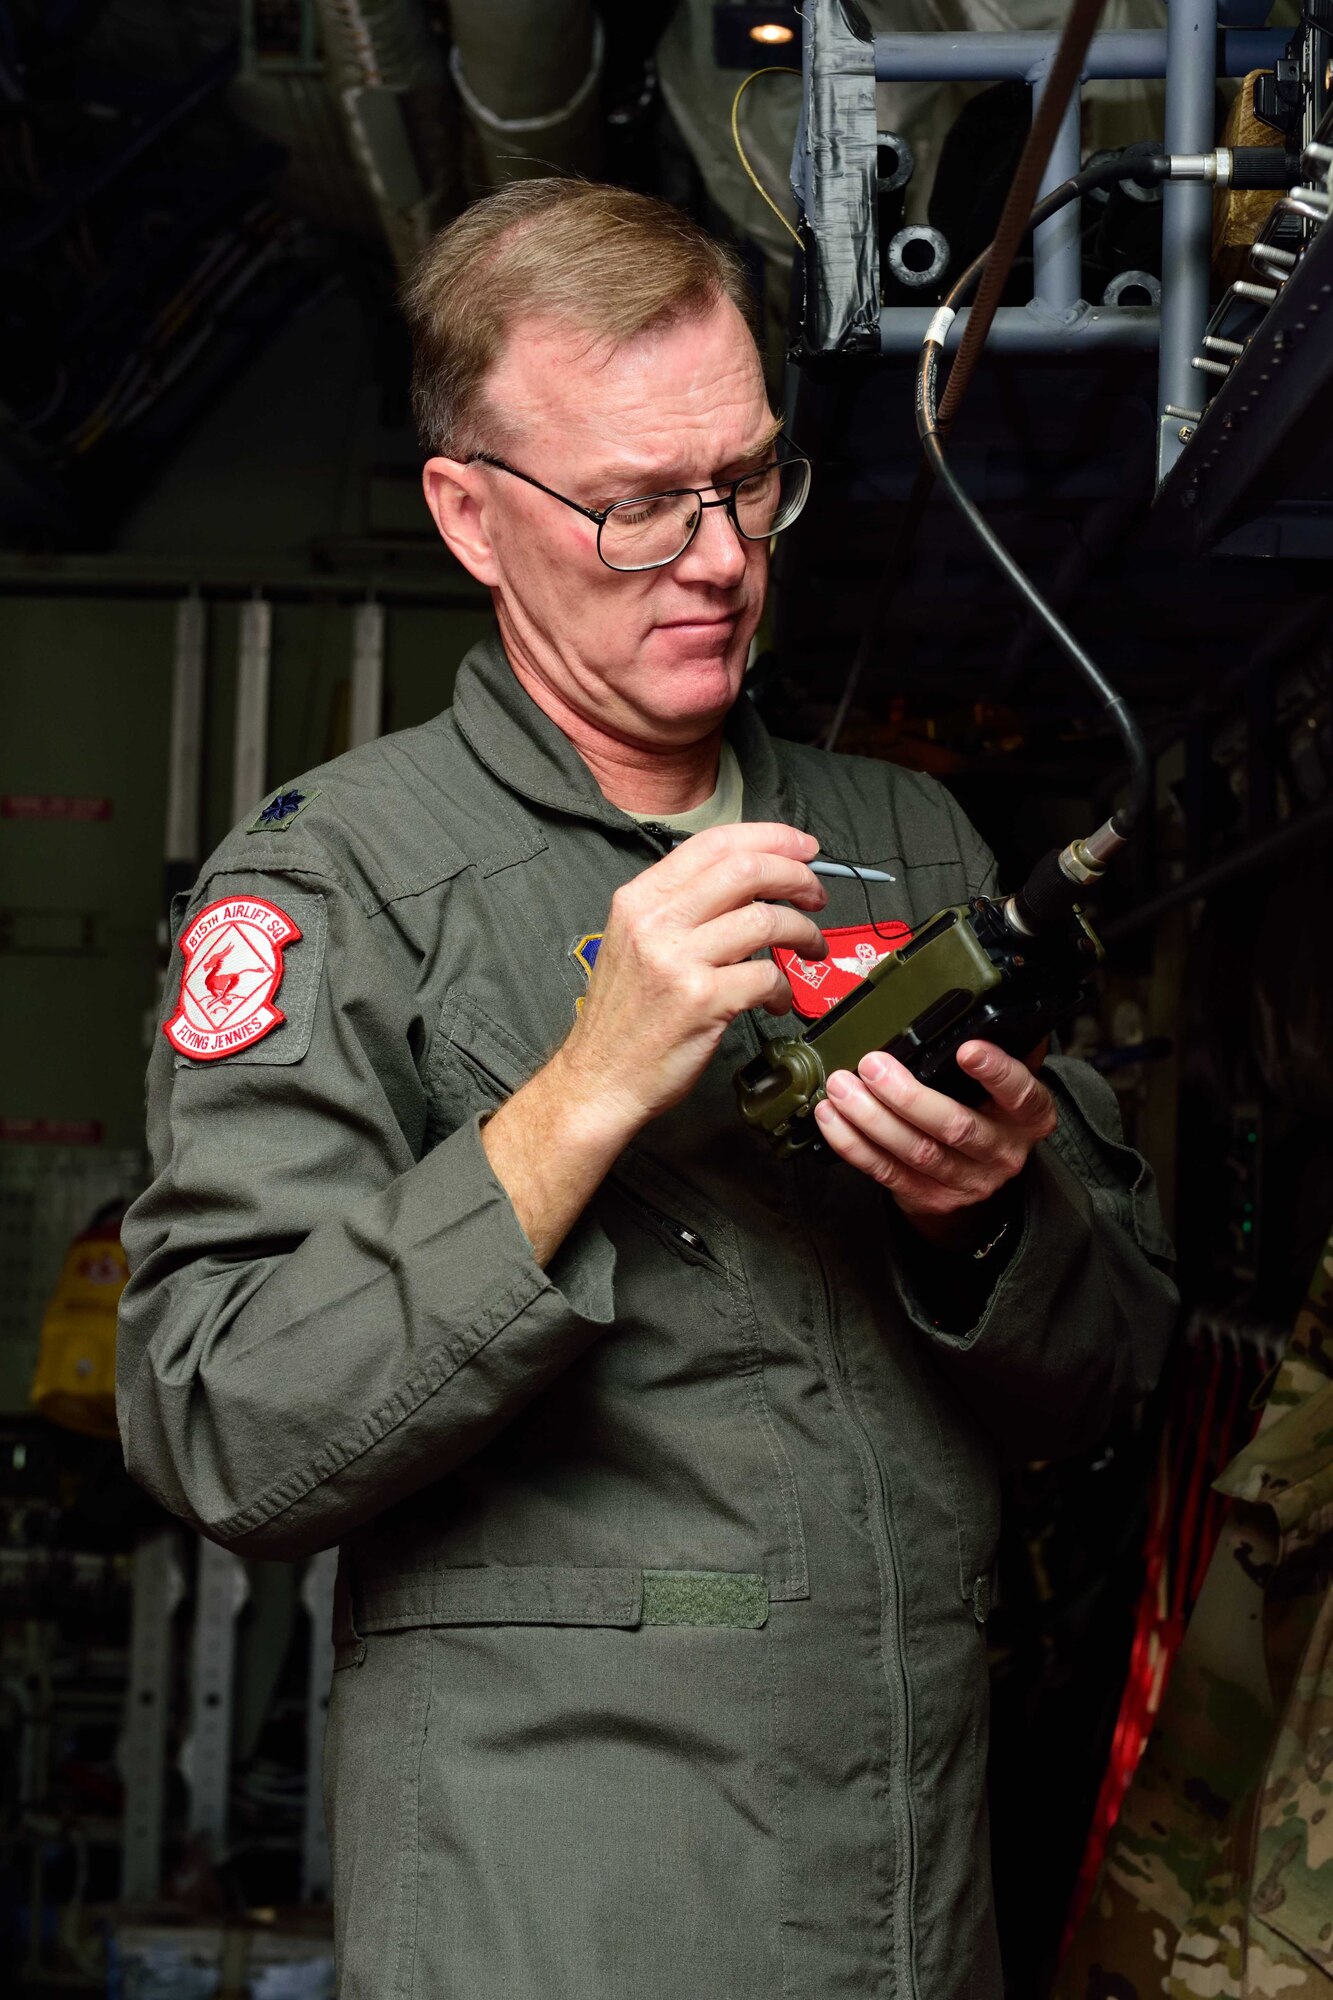 Lt. Col. Timothy Weiher, 815th Airlift Squadron assistant director of operations, tests a simple key loader communications security device on a C-130 Super Hercules aircraft at Keesler Air Force Base, Mississippi, in preparation for an aeromedical evacuation exercise Nov. 1, 2017, during Southern Strike 2018. Southern Strike 2018 is a large-scale, joint multinational combat exercise that provides tactical level training for the full spectrum of conflict and emphasizes air dominance, maritime operations, maritime air support, precision engagement, close air support, command and control, personnel recovery, aeromedical evacuation, and combat medical support. (U.S. Air Force photo by Tech. Sgt. Ryan Labadens)